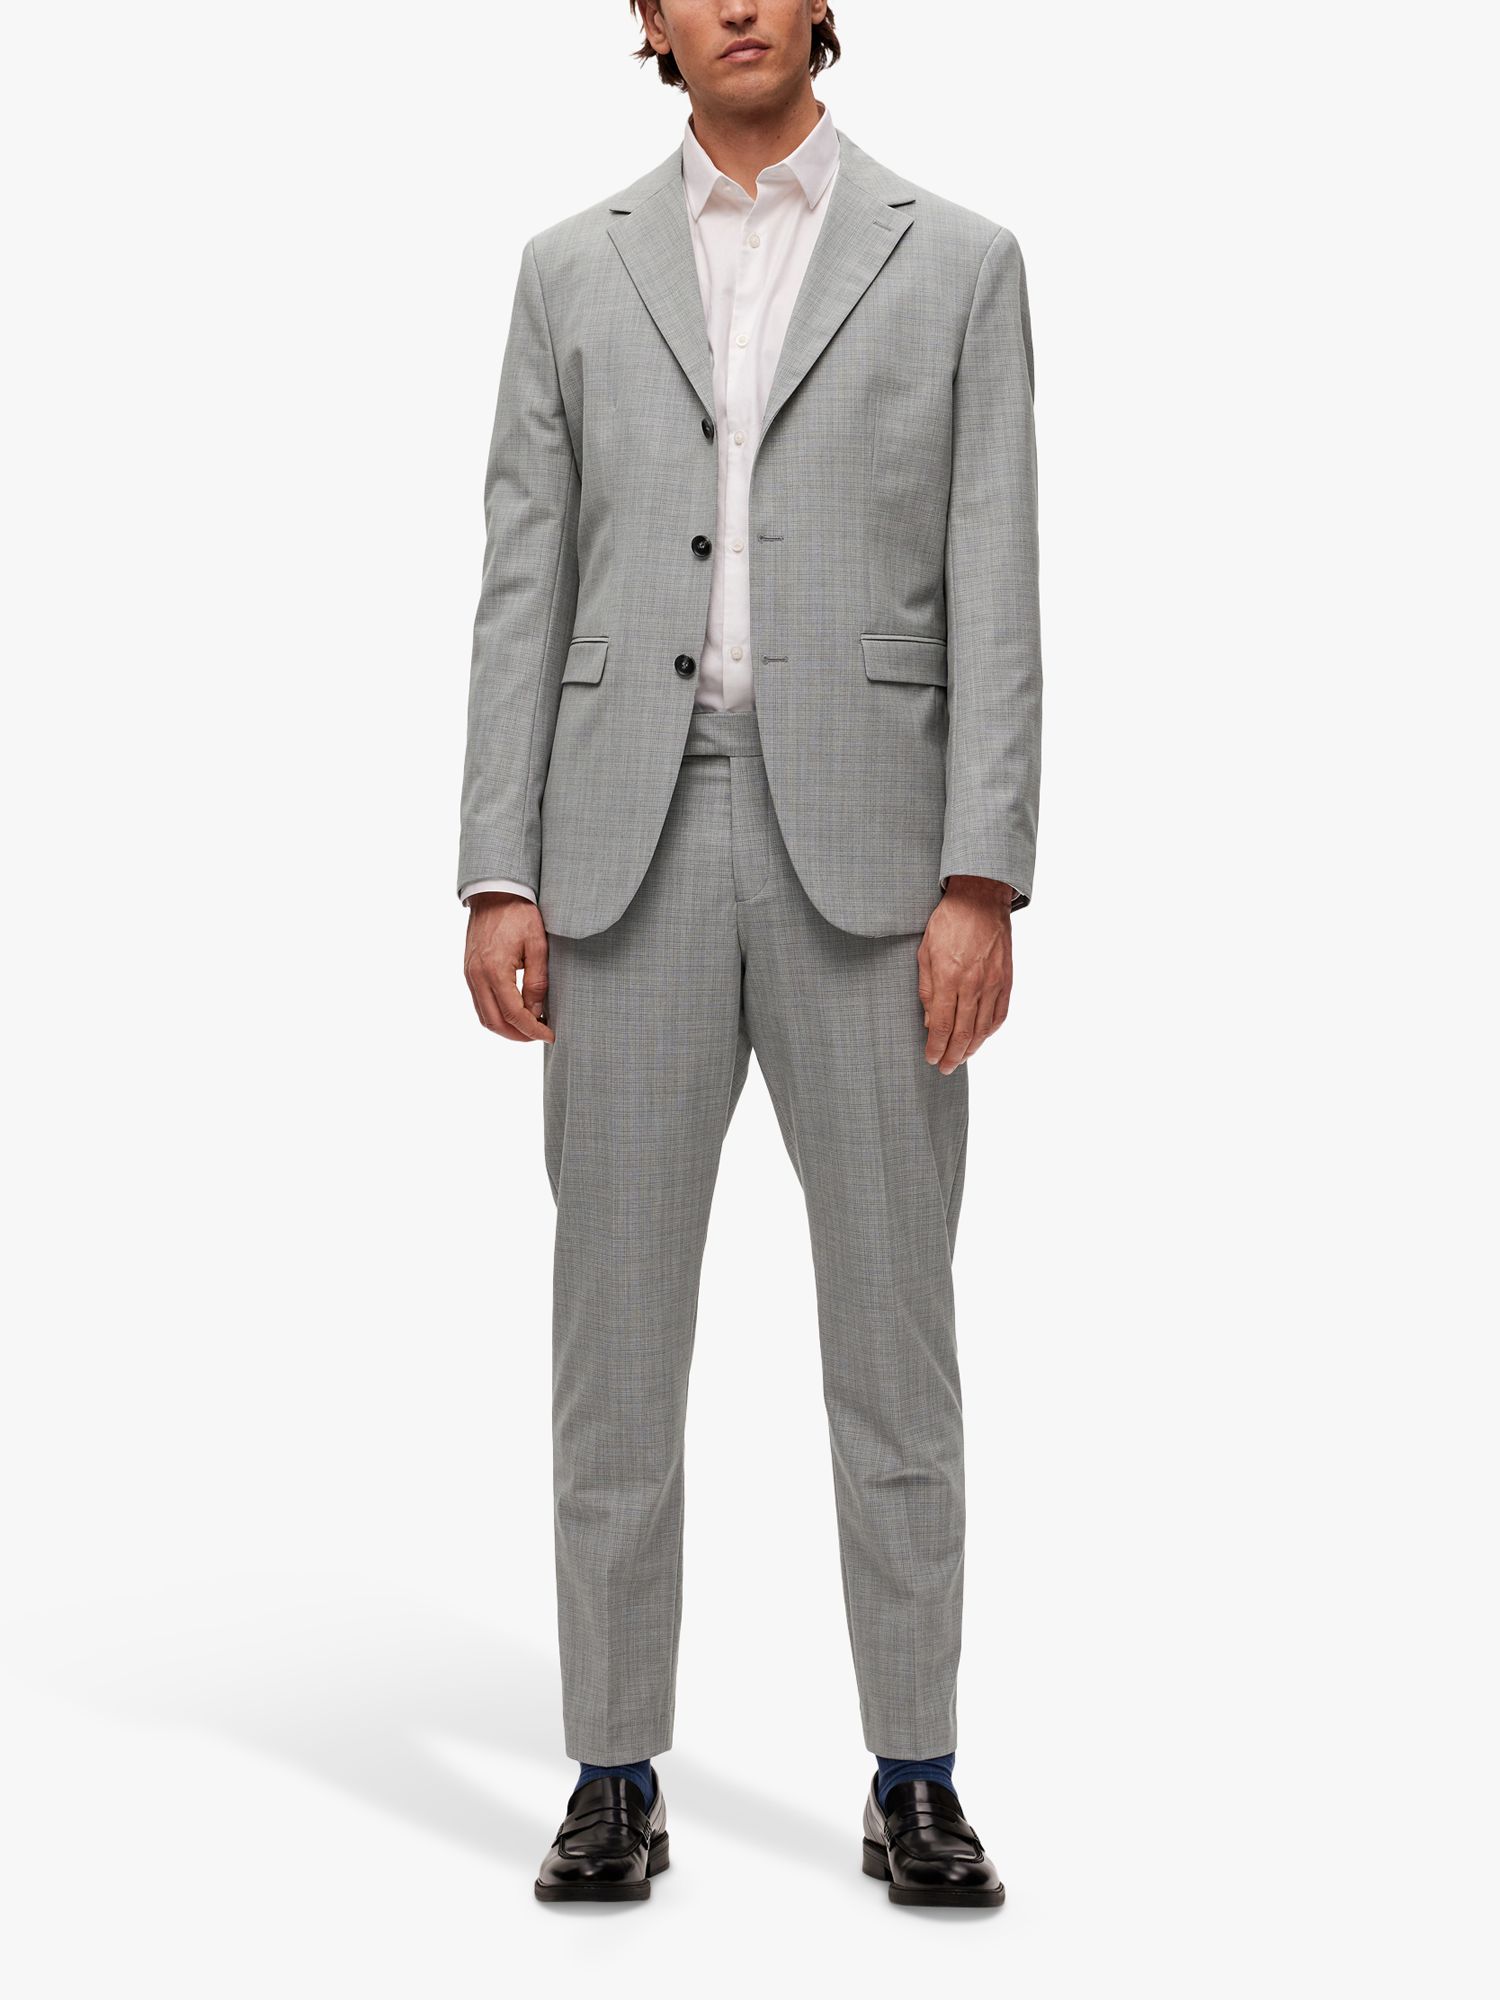 SELECTED HOMME Tailored Fit Suit Trousers, Light Grey Melange, 30R